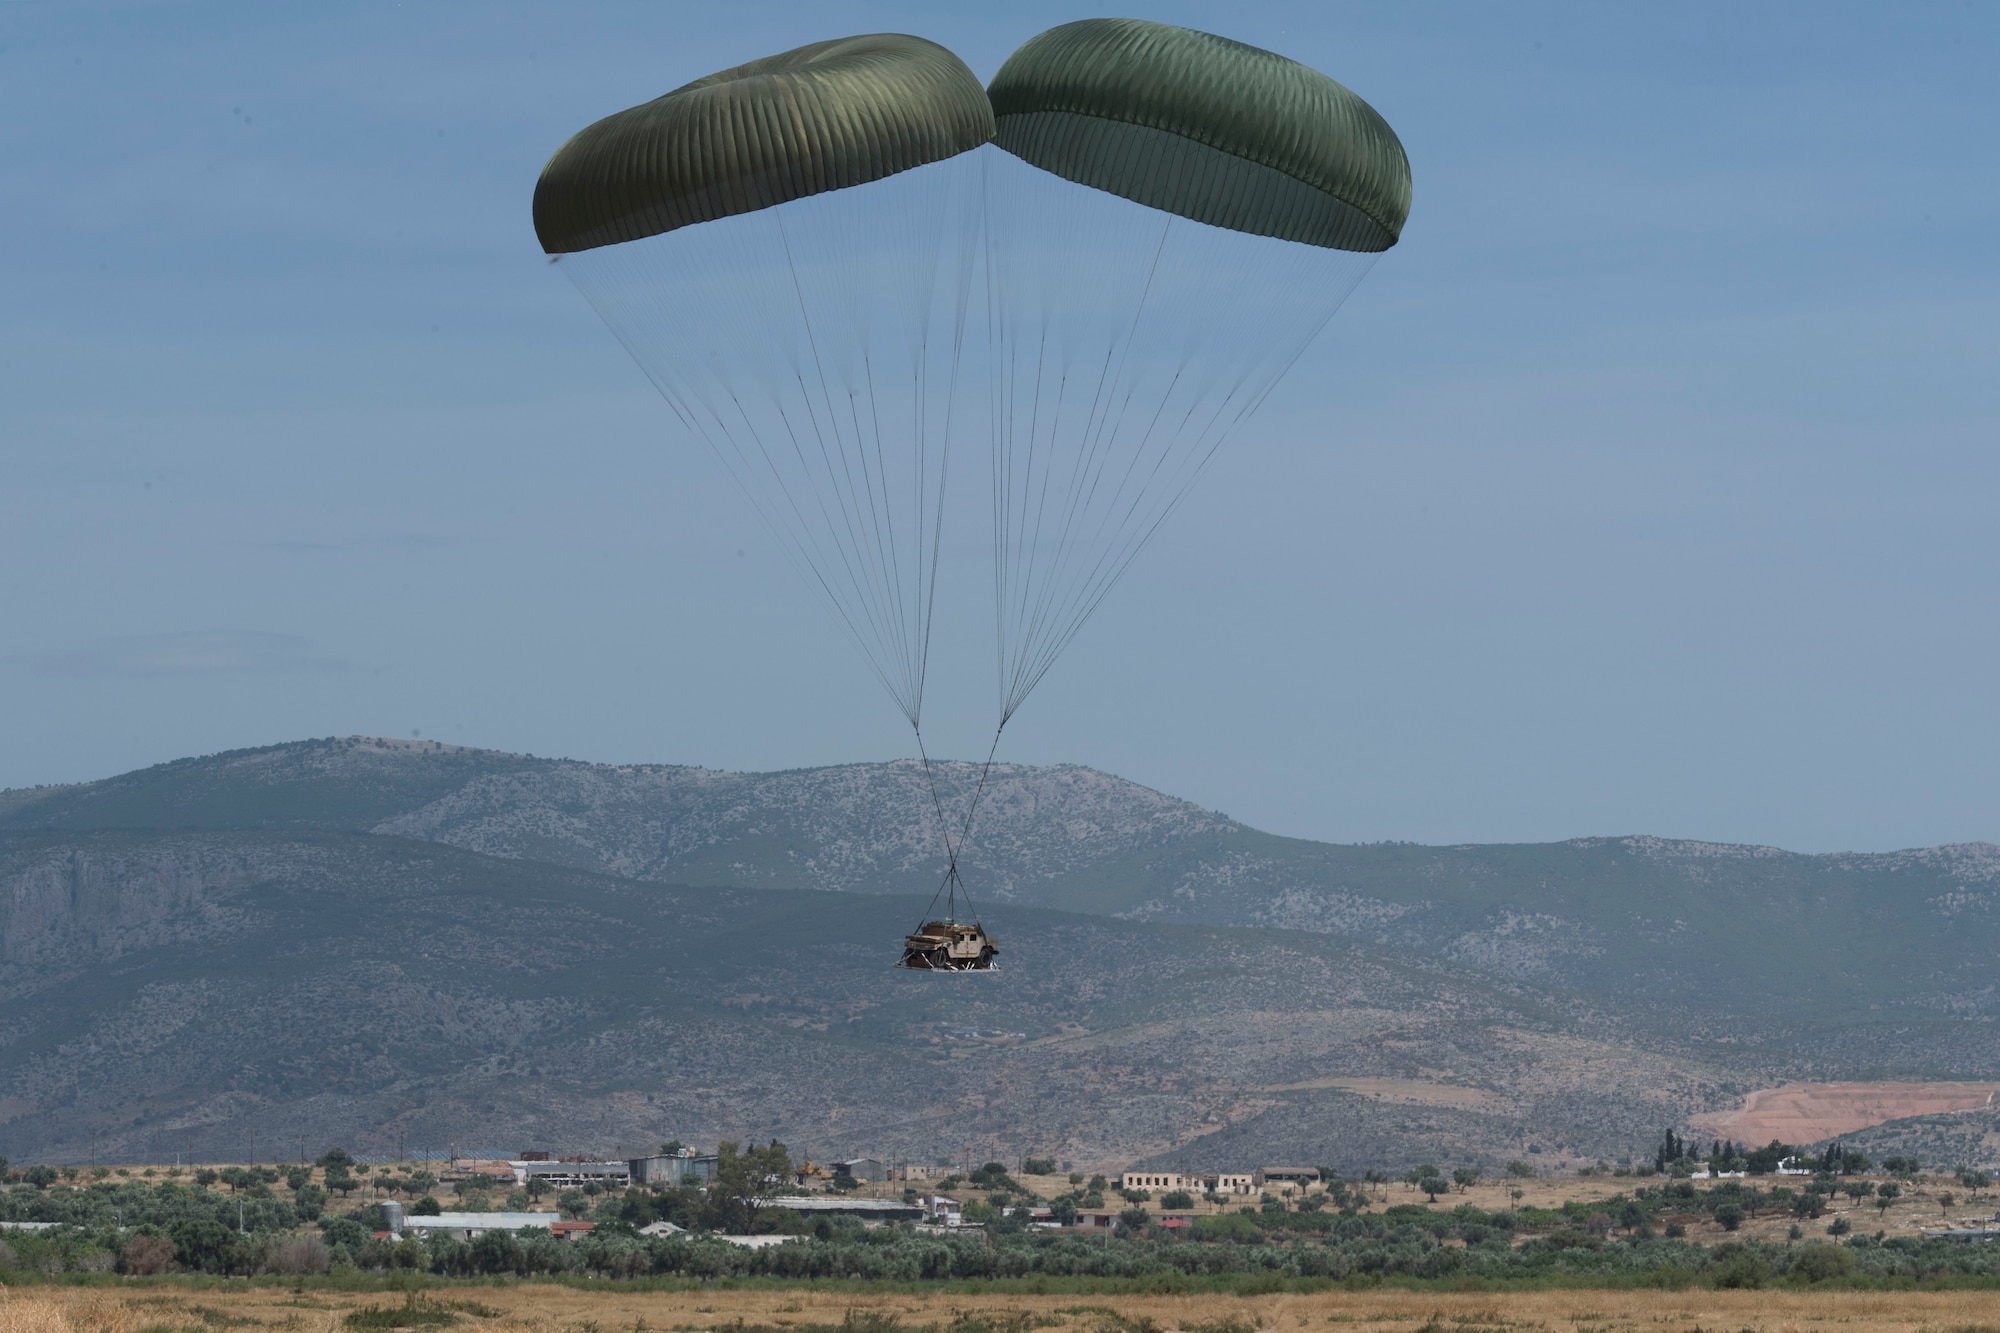 A U.S. Humvee rigged to parachutes floats to the ground during an exercise Stolen Cerberus V training mission over Megara Drop Zone, Greece, May 15, 2018. Hellenic riggers worked with U.S. Air Force joint airdrop inspectors to get the Humvee properly rigged to drop. (U.S. Air Force photo by Senior Airman Devin M. Rumbaugh)